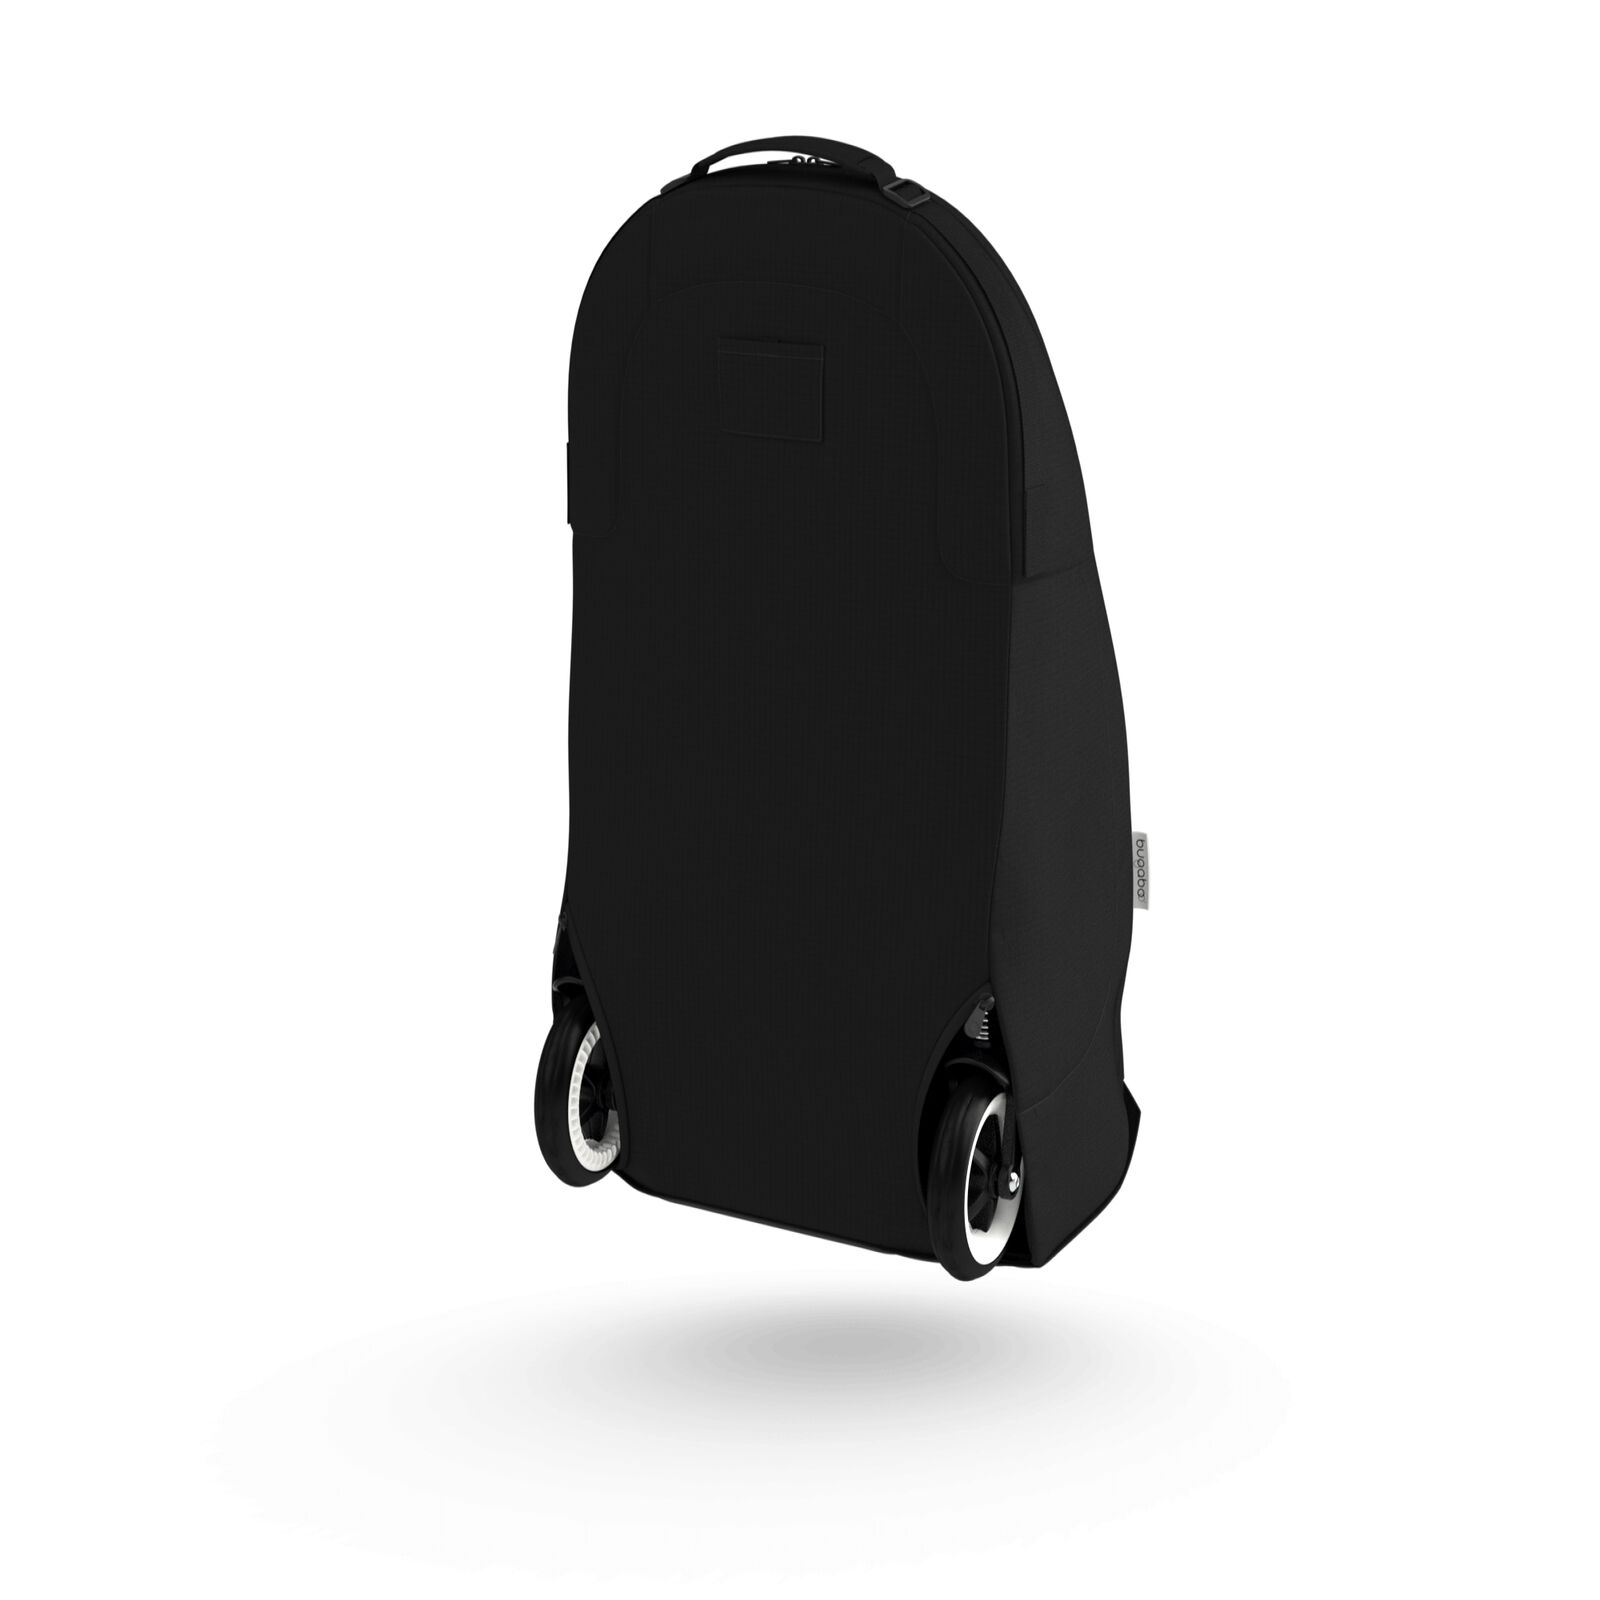 Bugaboo compact transport bag - View 5